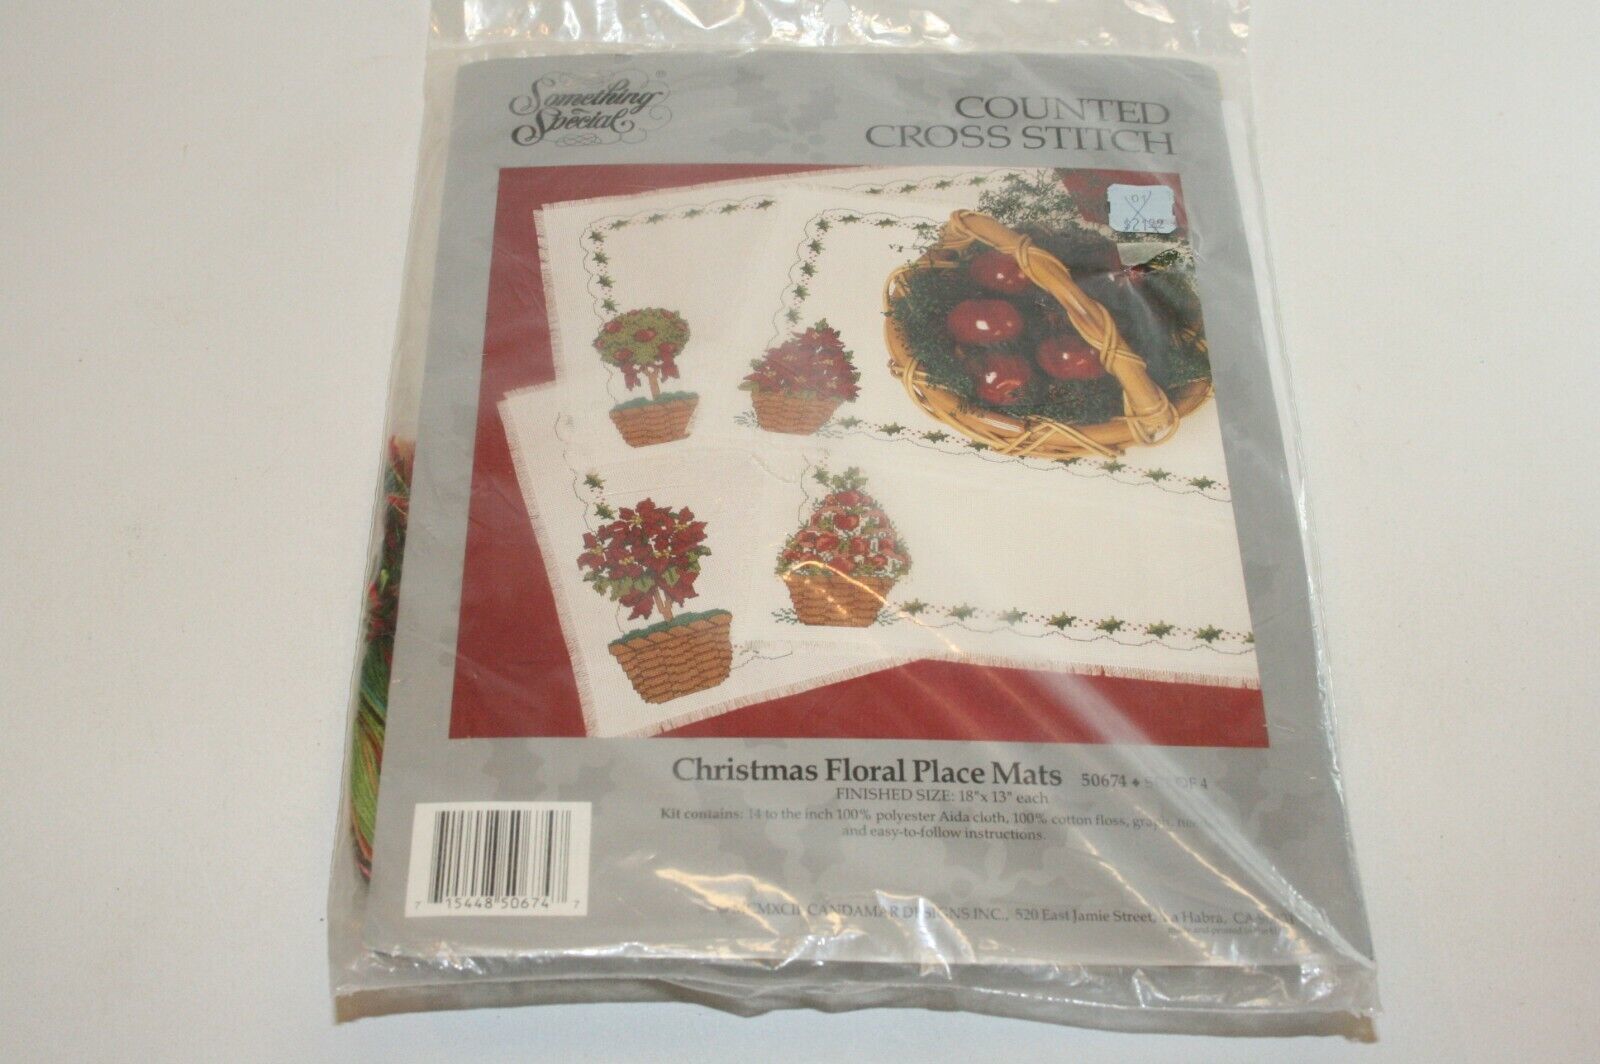 1992 Something Special #50674 Christmas Floral Placemats 18x13 Cross Stitch NOS - $12.86